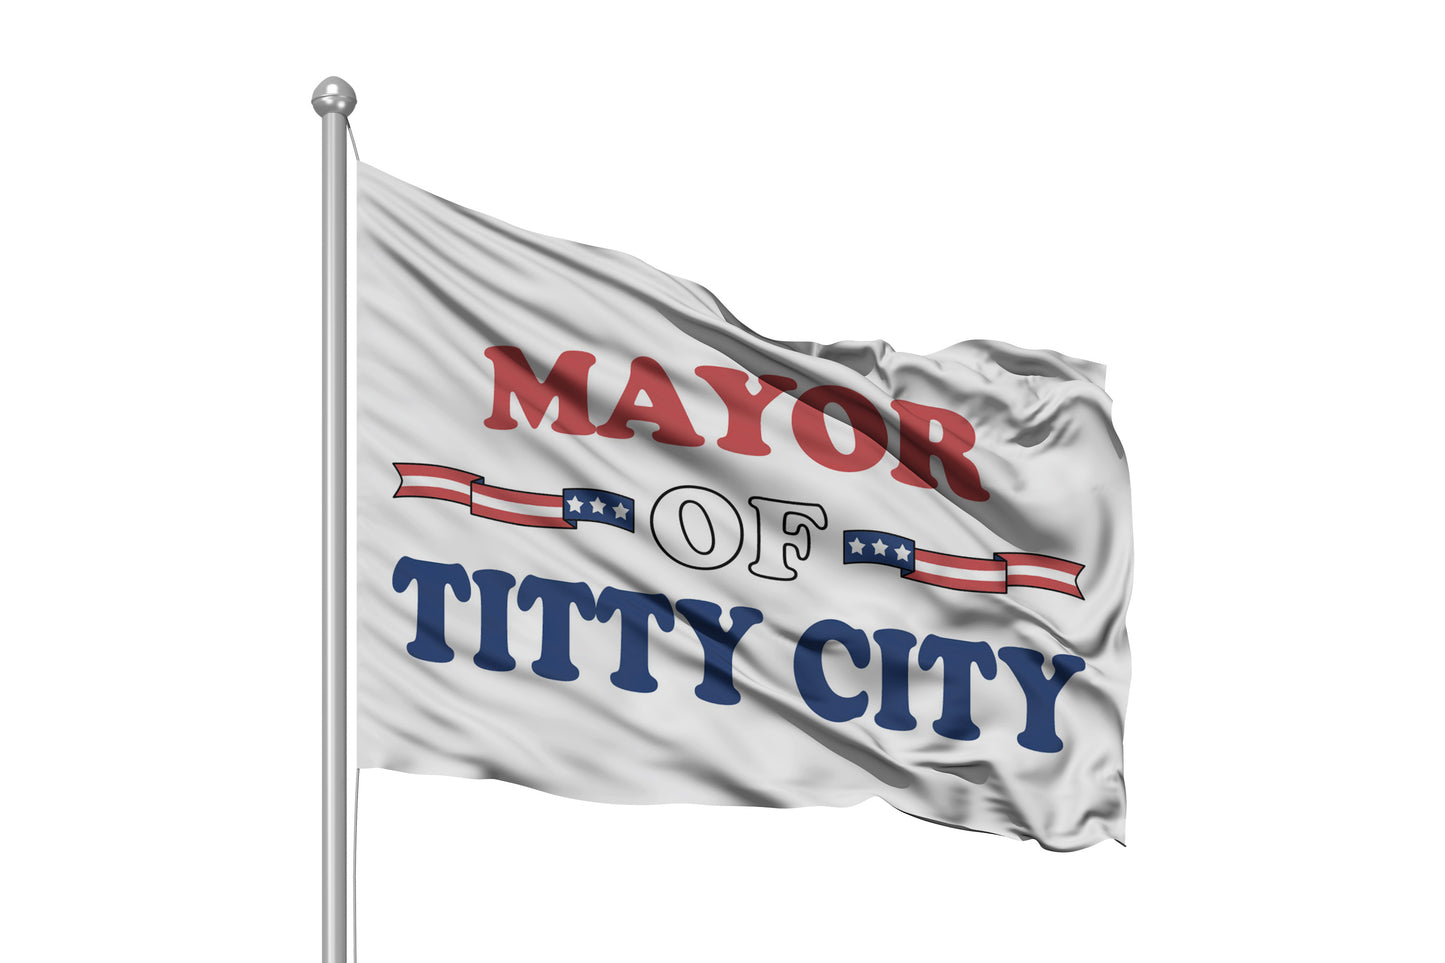 Mayor Of Titty City Flag 3x5 Wall Decor Banner Red/White/Blue #2